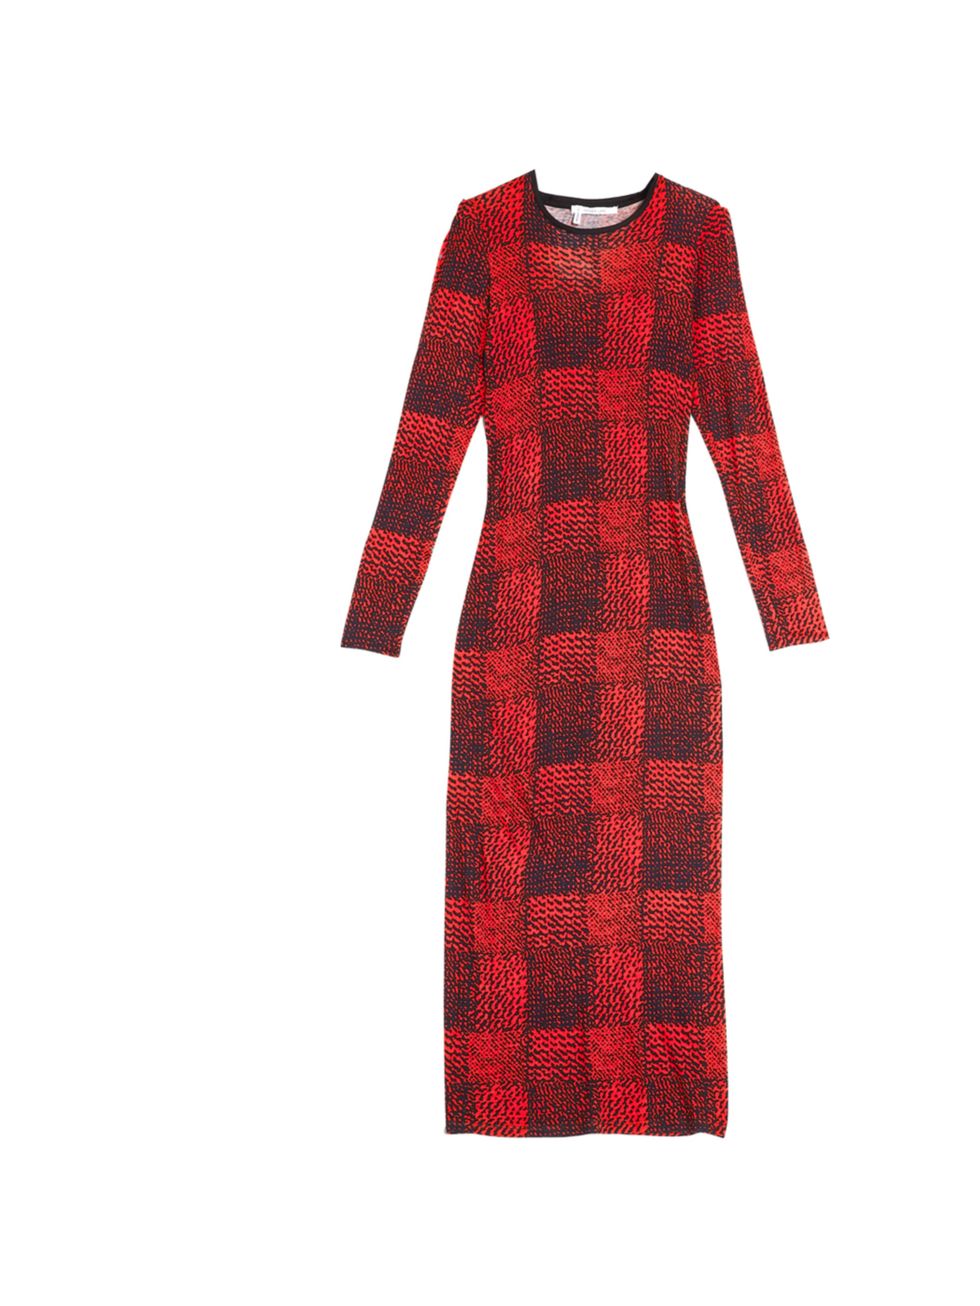 <p>Kristen Stewart is a big fan of this NYC label and were pretty smitten too  10 Crosby by Derek Lam plaid print dress, £245 at My-Wardrobe</p><p><a href="http://shopping.elleuk.com/browse?fts=10+crosby+plaid+print+dress">BUY NOW</a></p>